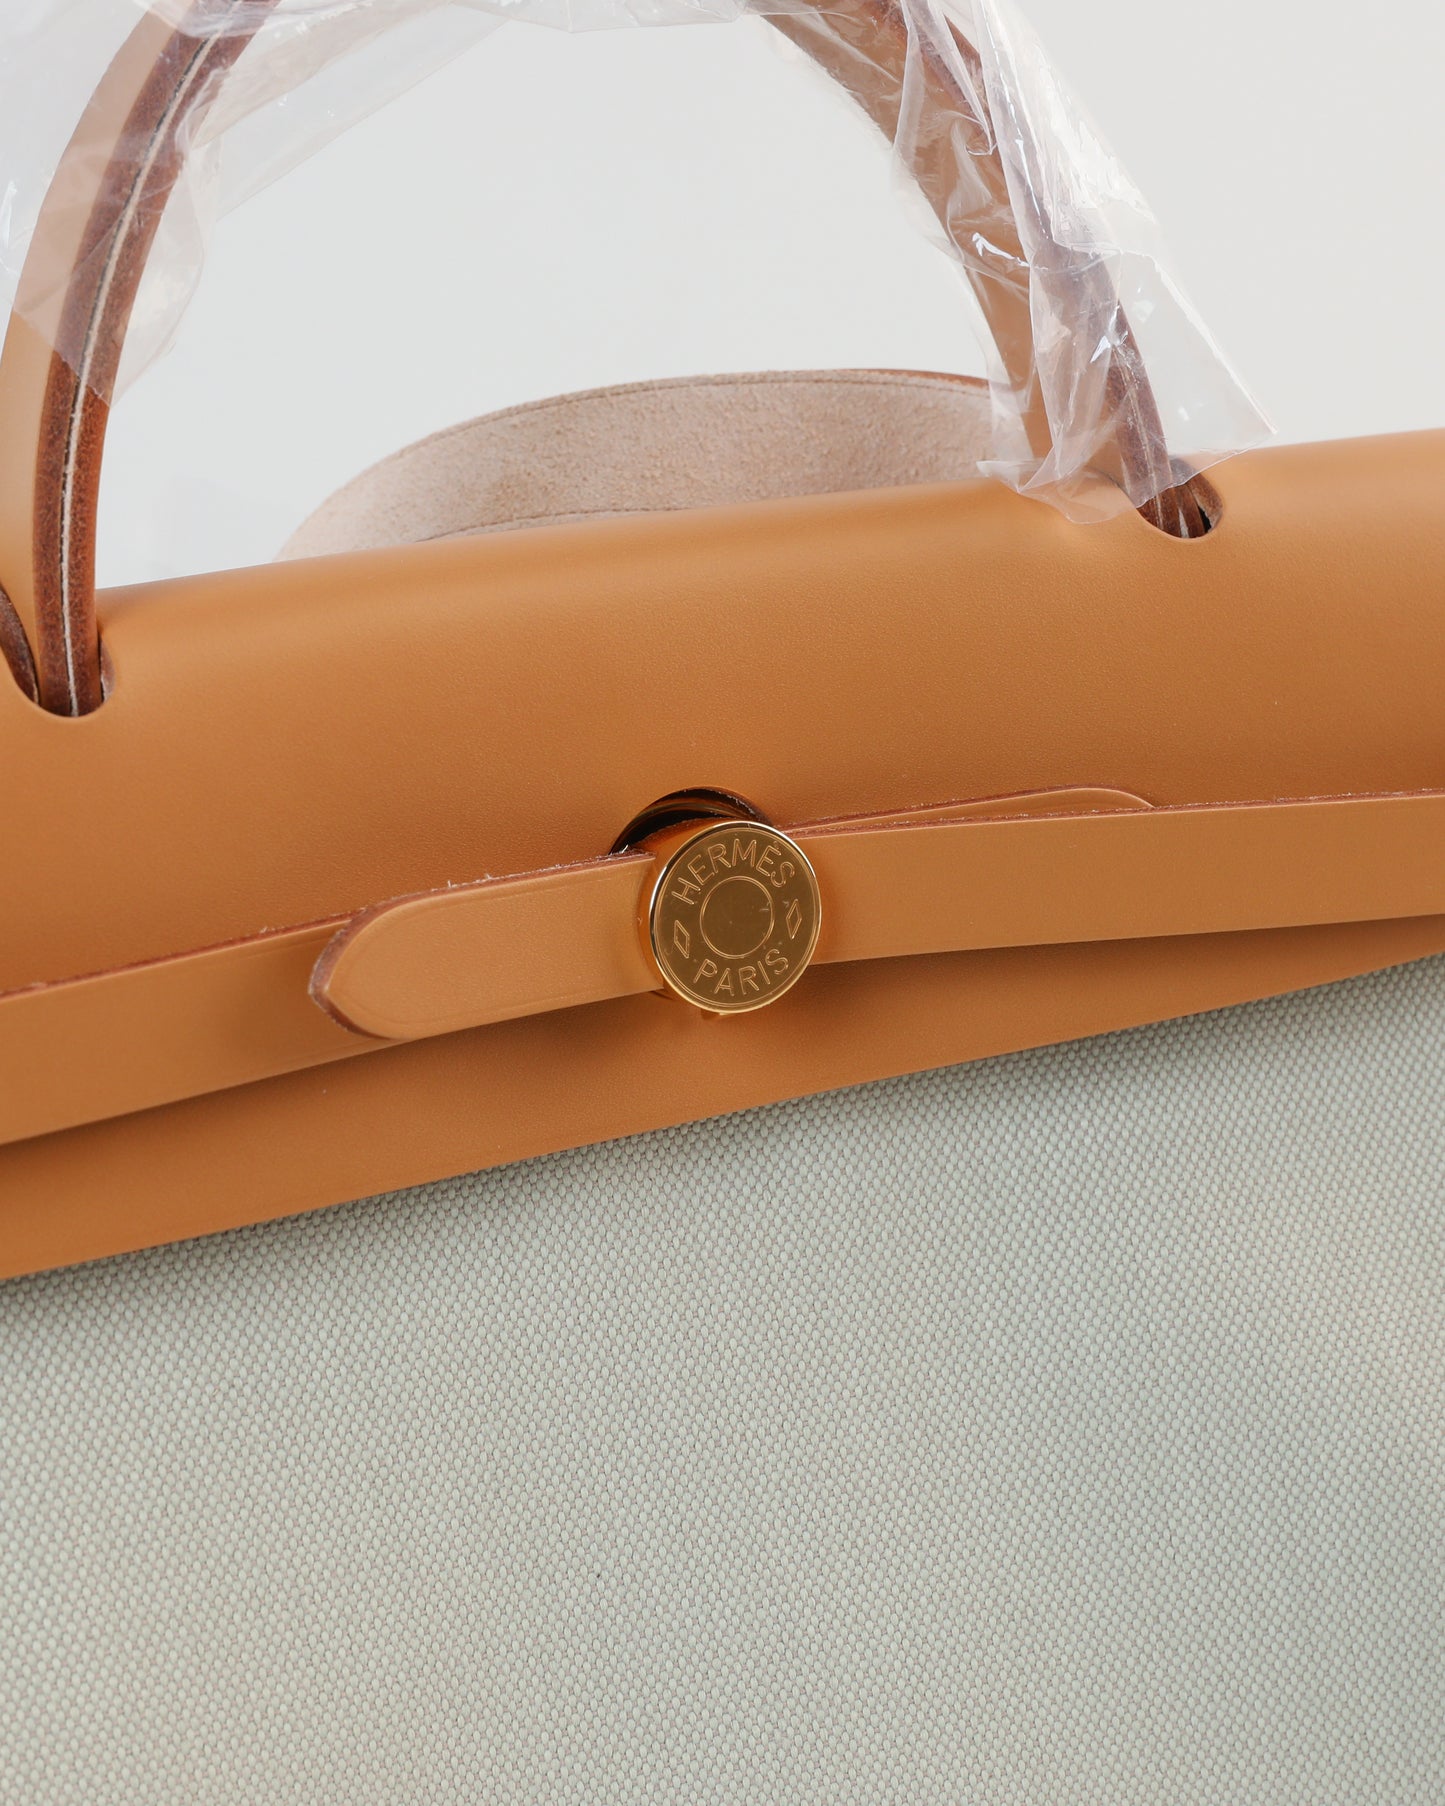 Herbag Zip 31 in Natural Vache Hunter and Beton Toile with Gold Hardware